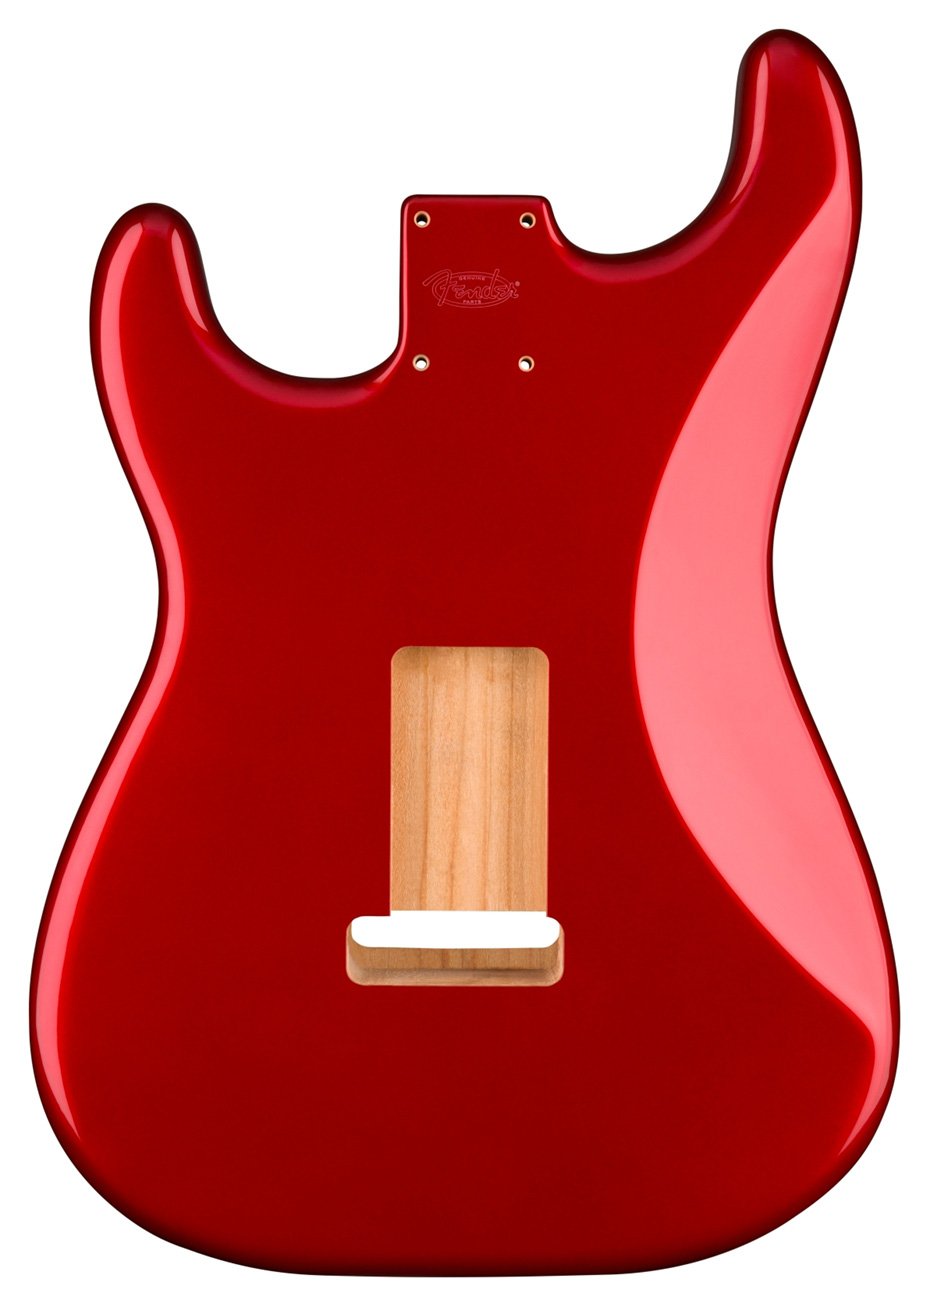 099-8003-709 0998003709 - Fender Classic Series 60's Stratocaster Replacement Alder Body, Candy Apple Red (MIM)